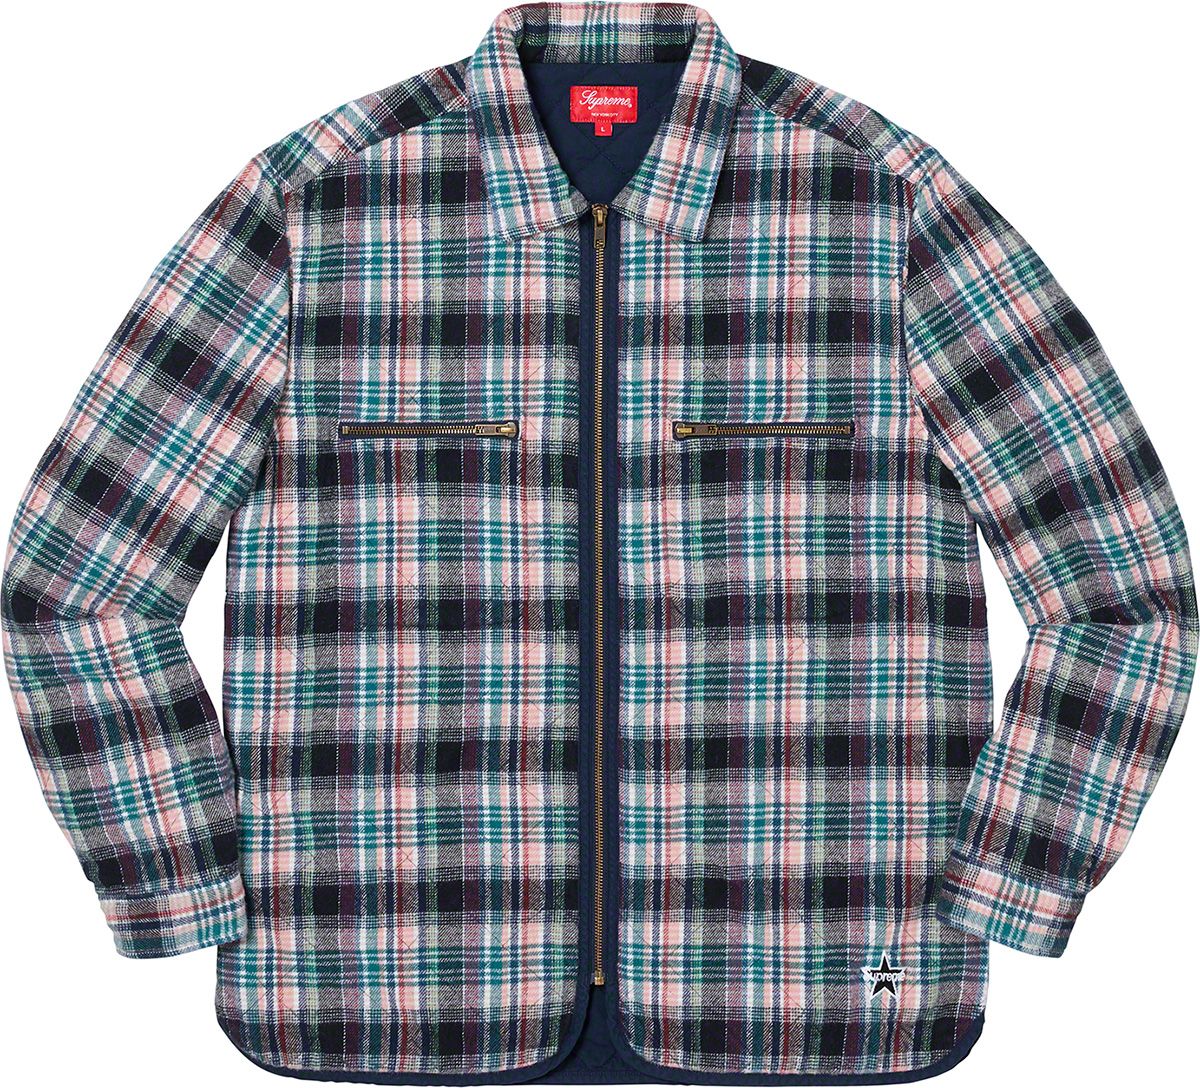 Quilted Plaid Zip Up Shirt - Fall/Winter 2019 Preview – Supreme